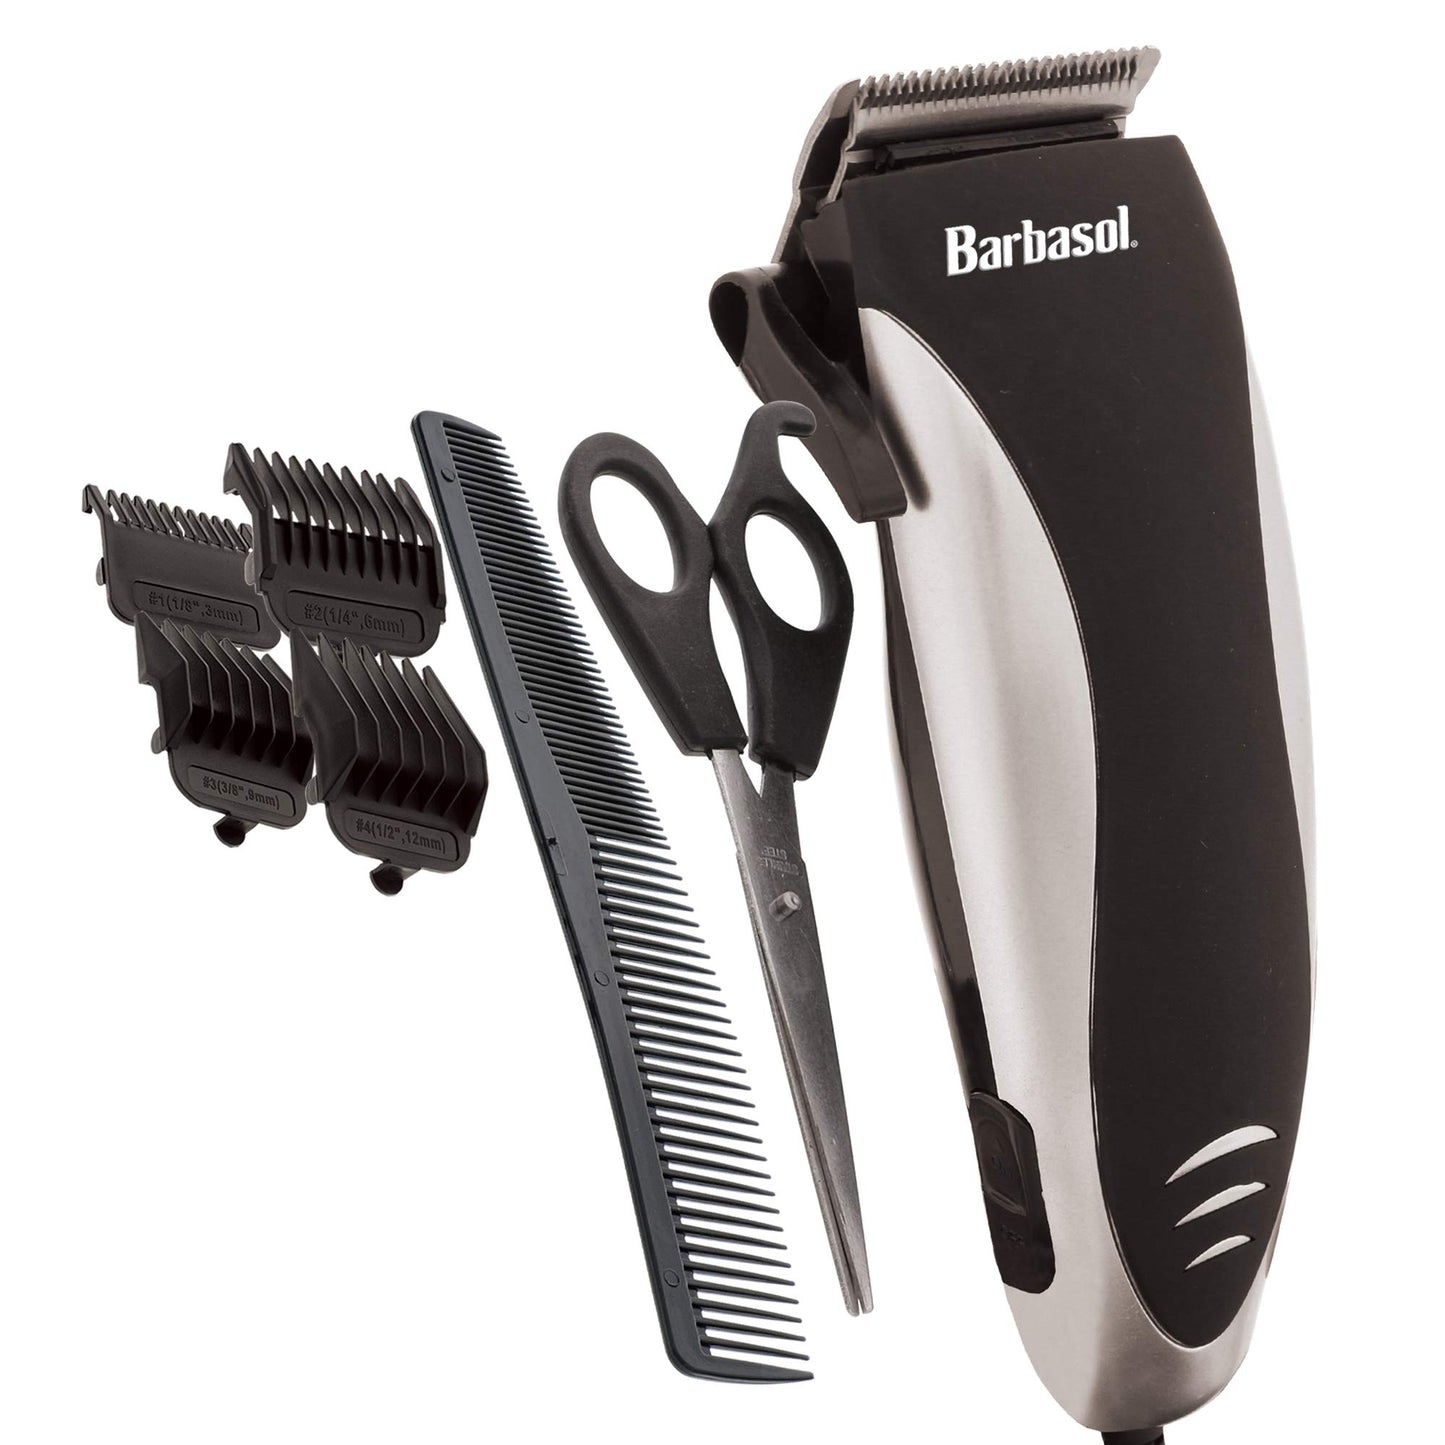 Xtreme Digital Lifestyle Accessories Barbasol Professional Hair Clipper Kit with Stainless Steel Blades, 4 Guide Combs, Adjustable Taper and Travel Bag